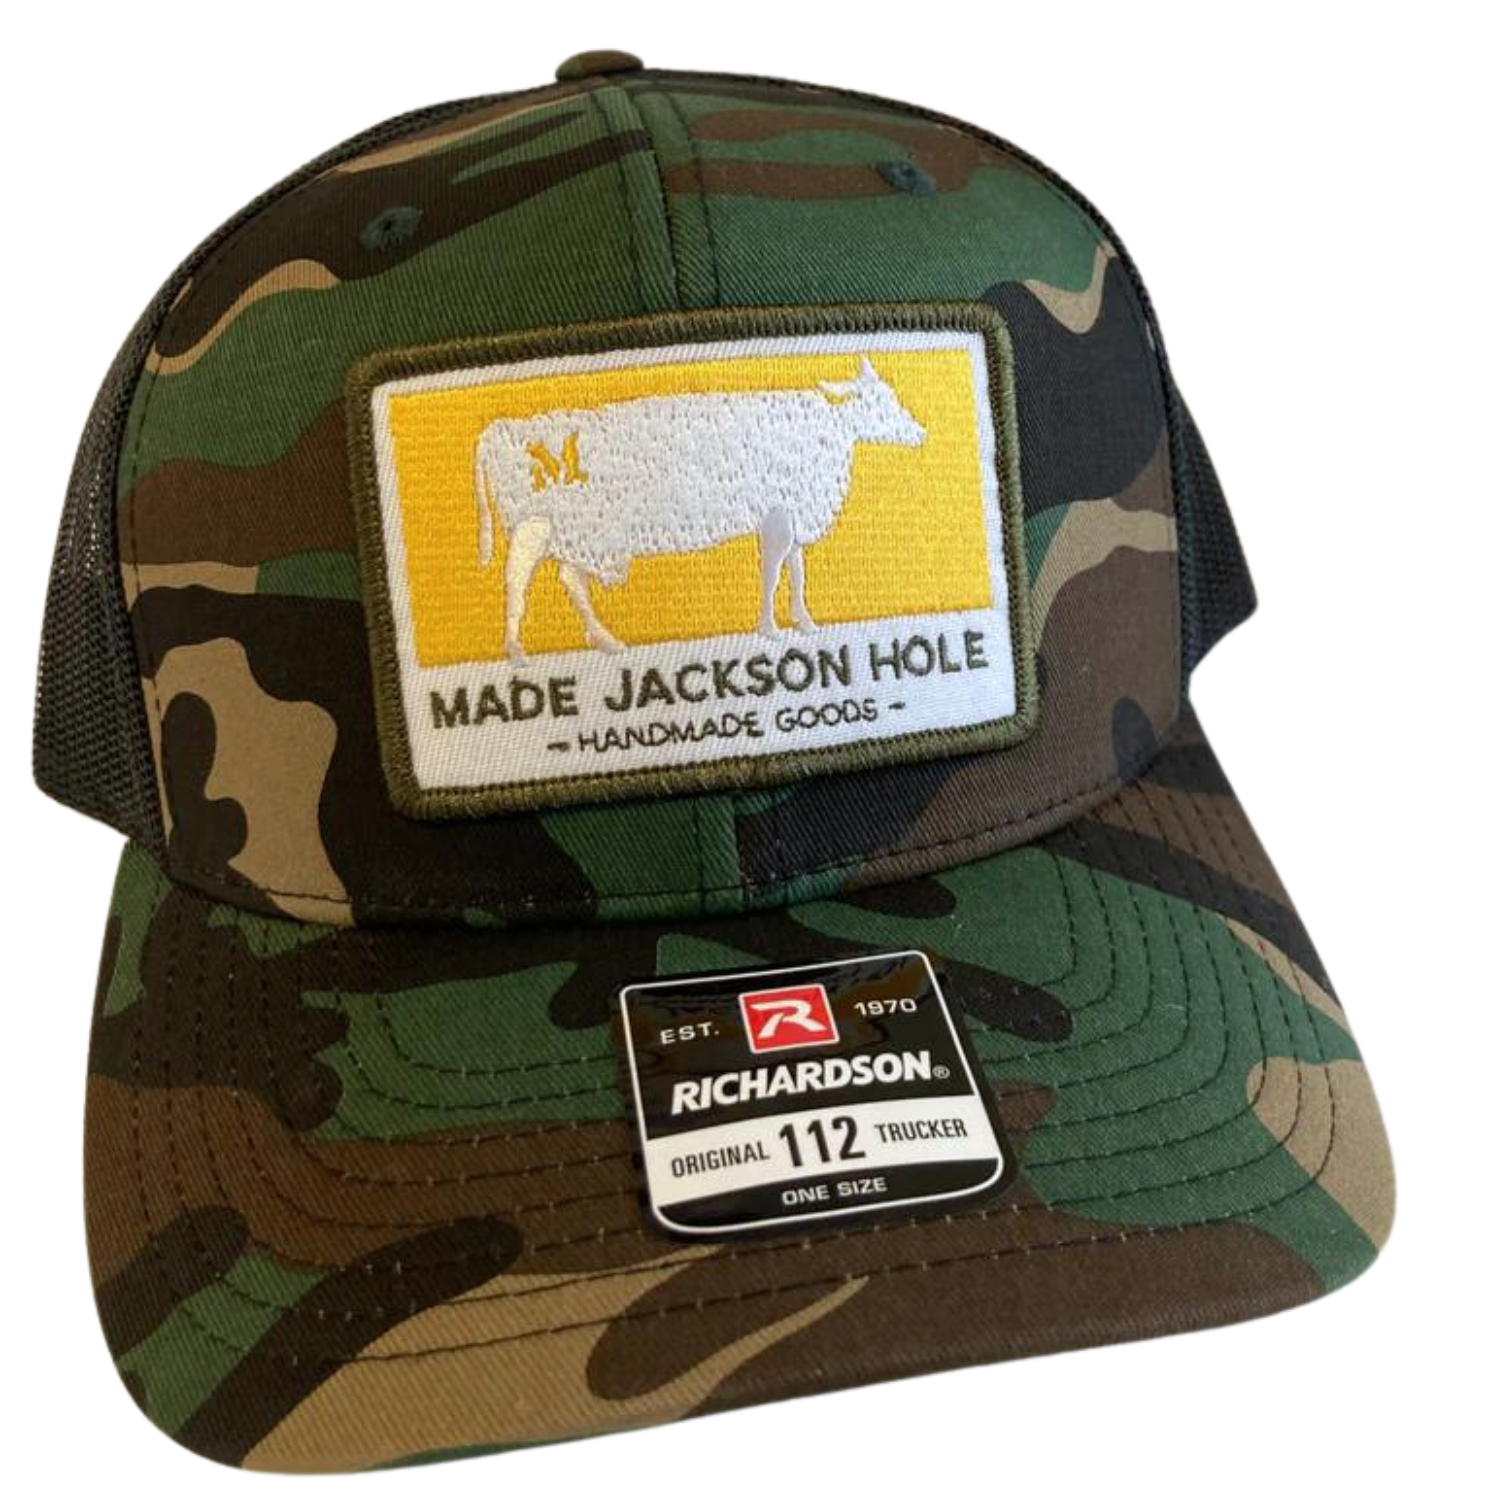 Camo Trucker Hat with Made Jackson Hole Handmade Goods Patch 